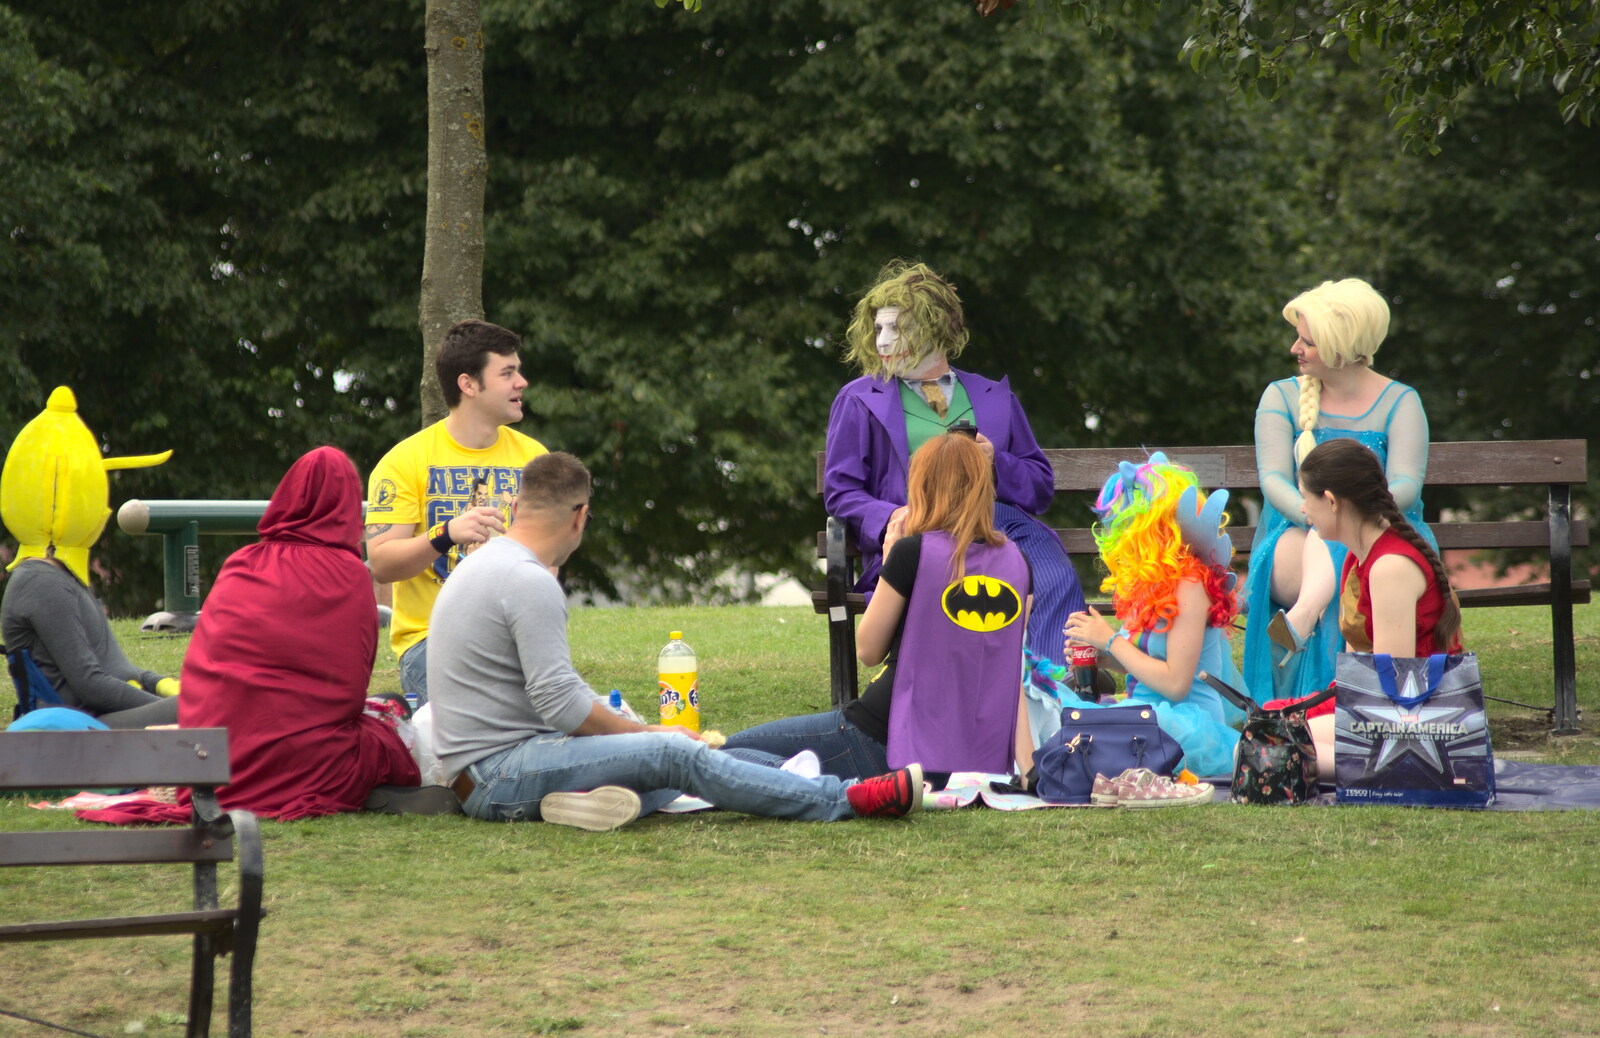 The Comicon Picnic continues from A Race For Life, The Park, Diss, Norfolk - 16th August 2015